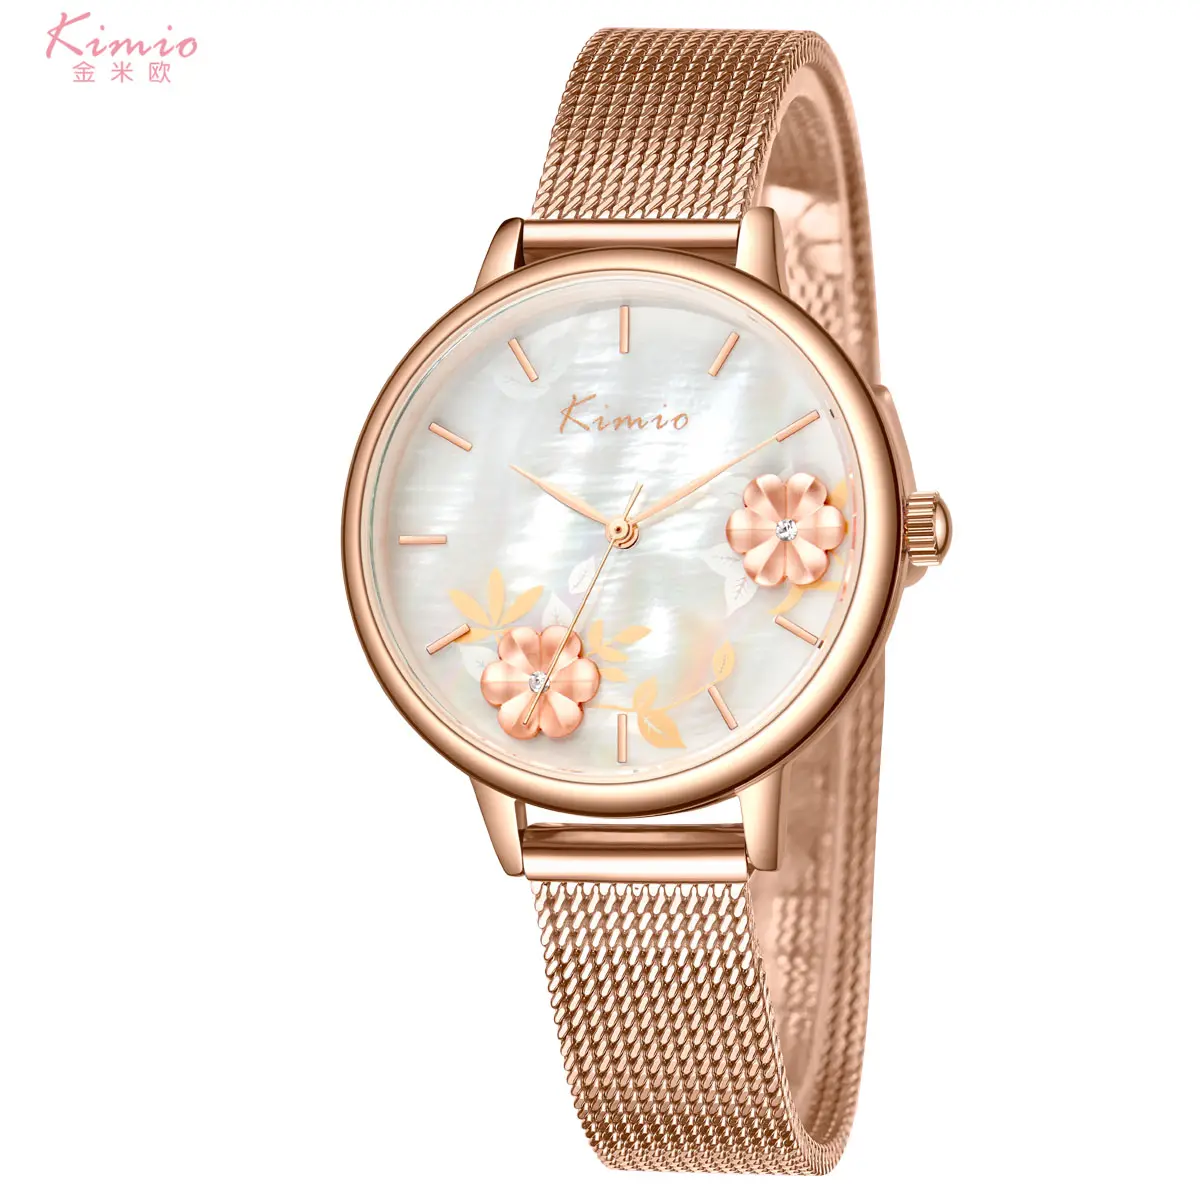 Fashion Mesh Band Japan Movt Stainless Steel Women Wrist Watch Unique MOP dial Ladies Watches